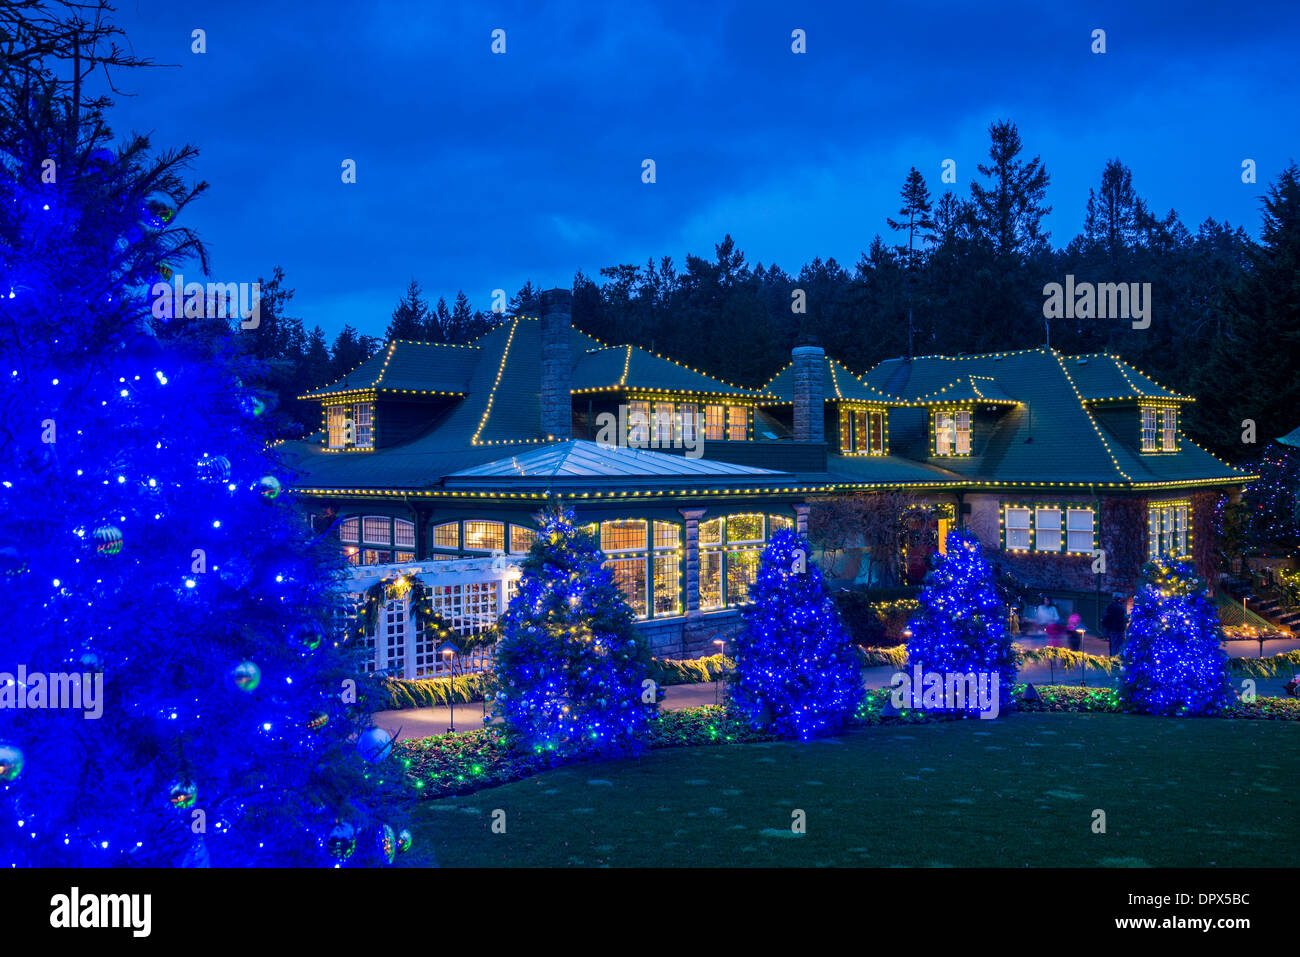 Victoria-Canada Tour - Residential Christmas Light Tour in